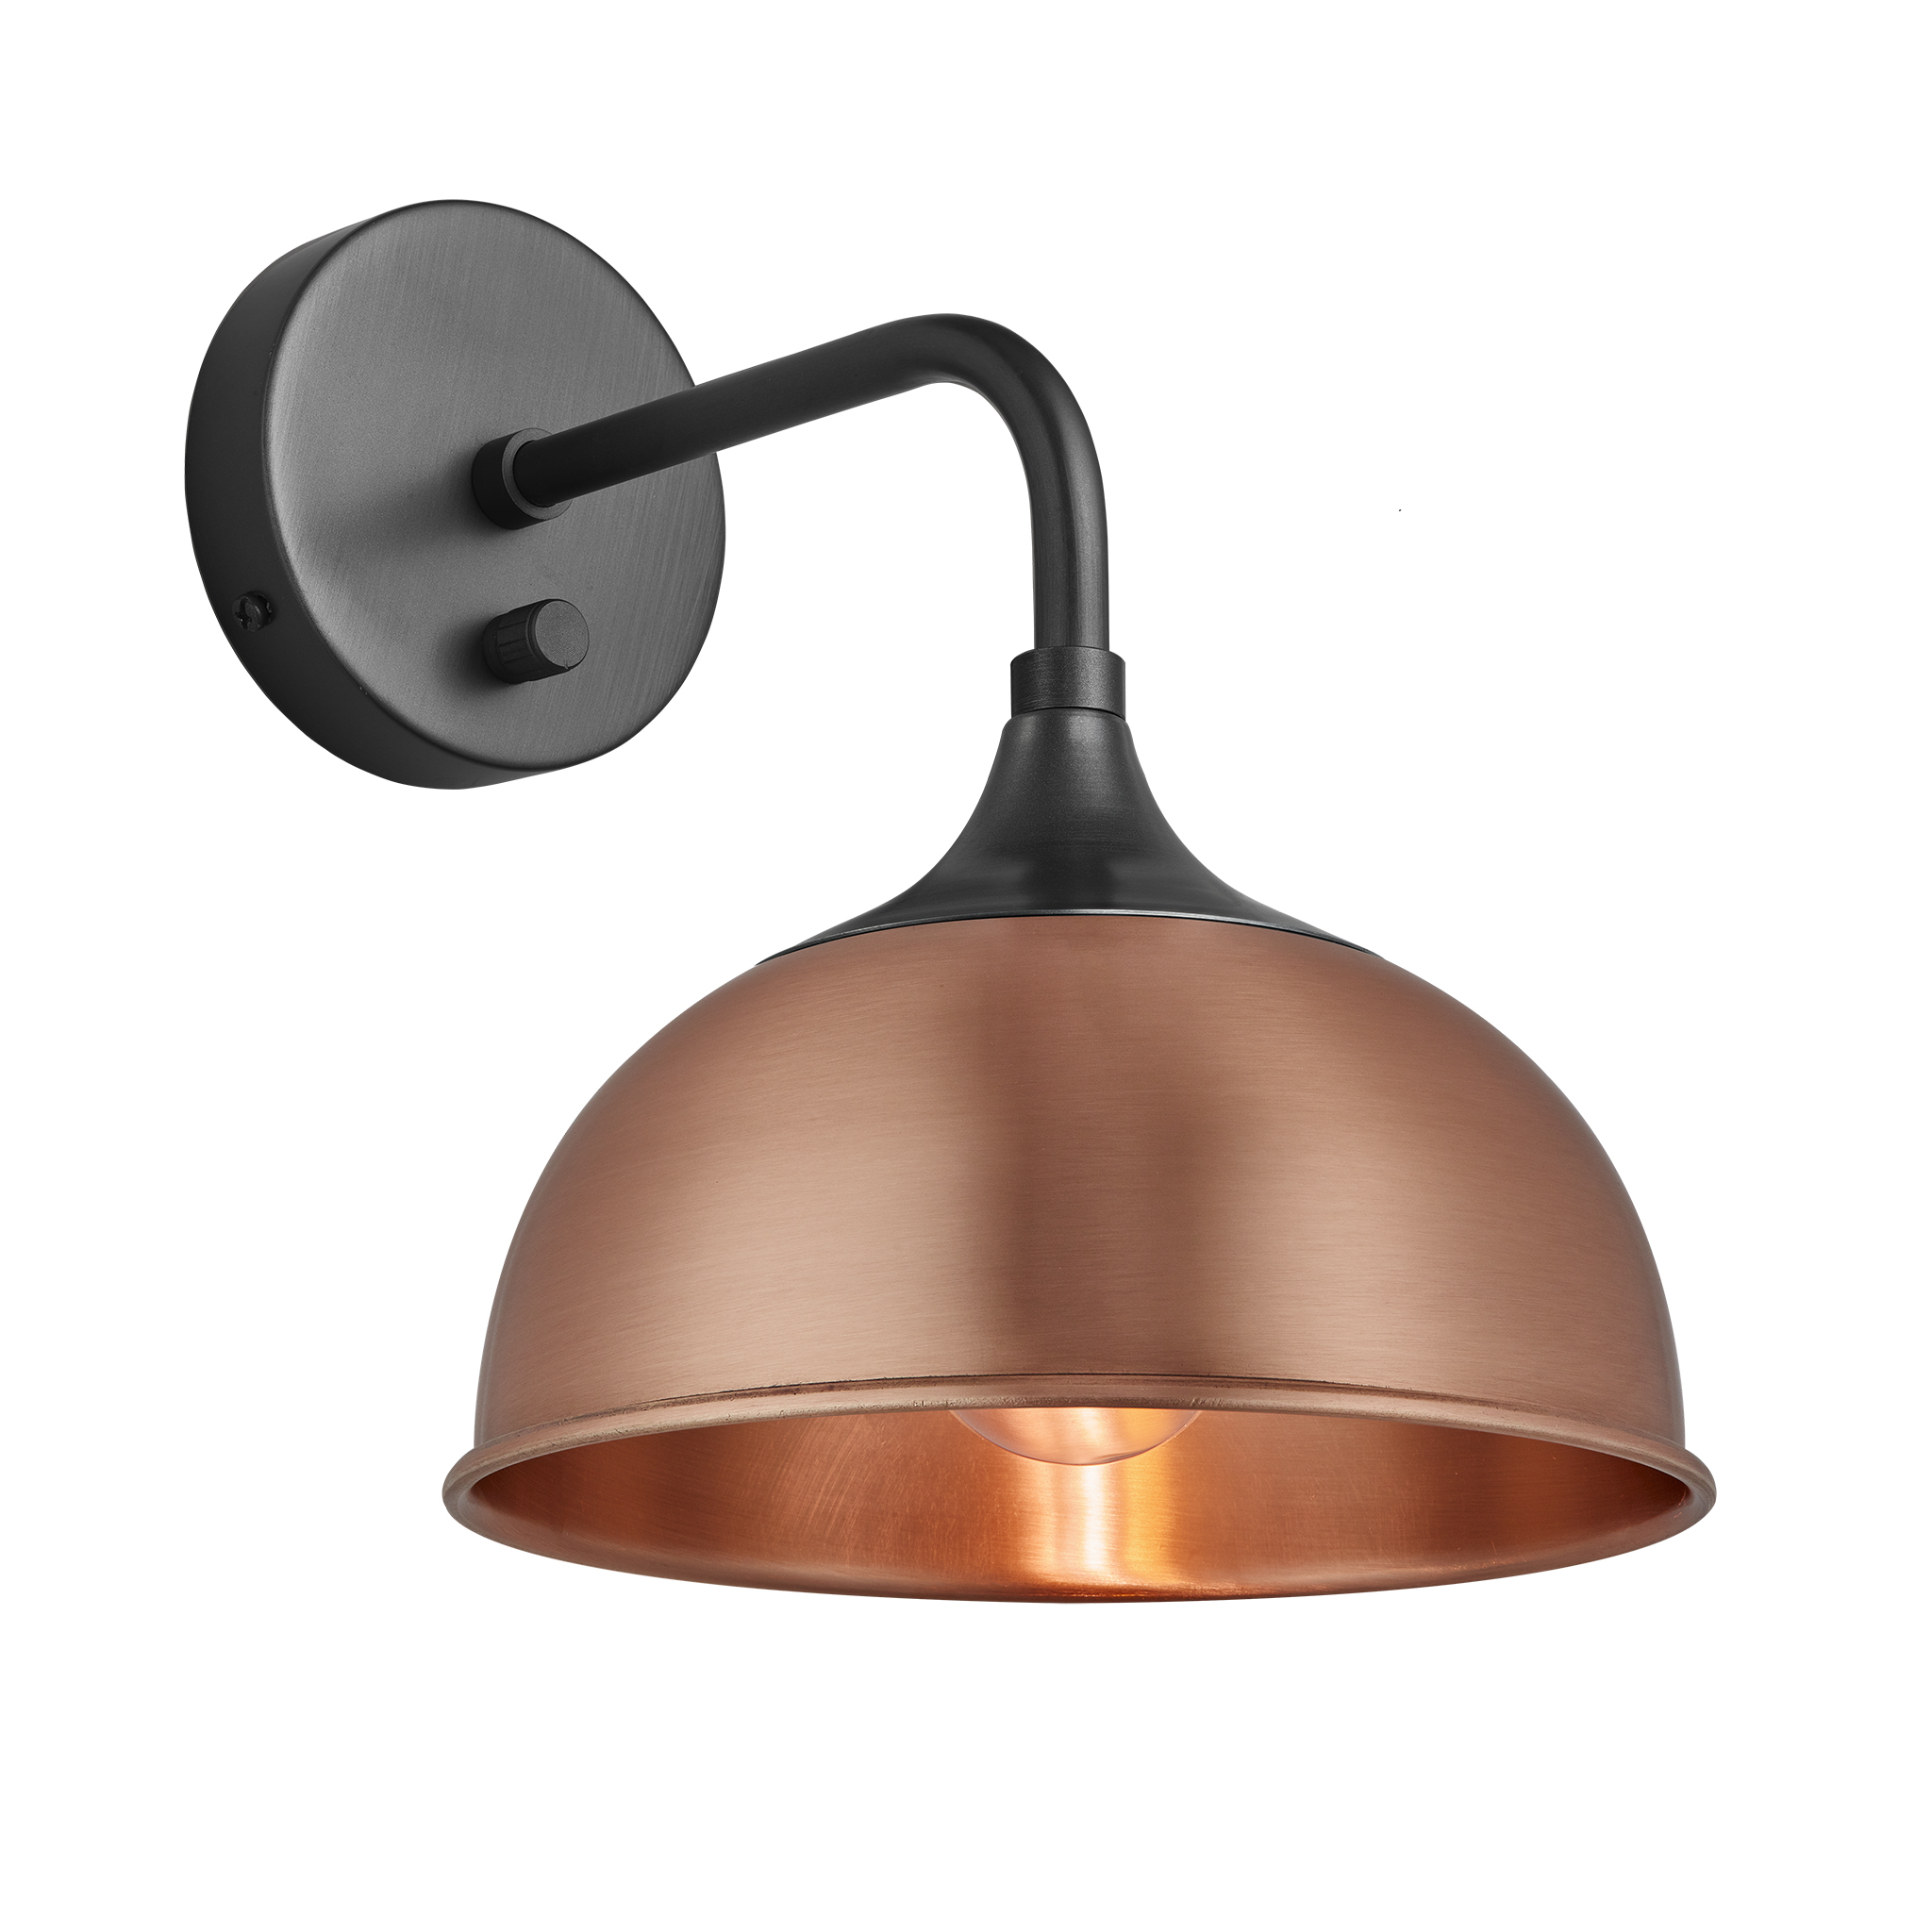 Chelsea Dome Wall Light - 8 Inch - Copper - Pewter Holder